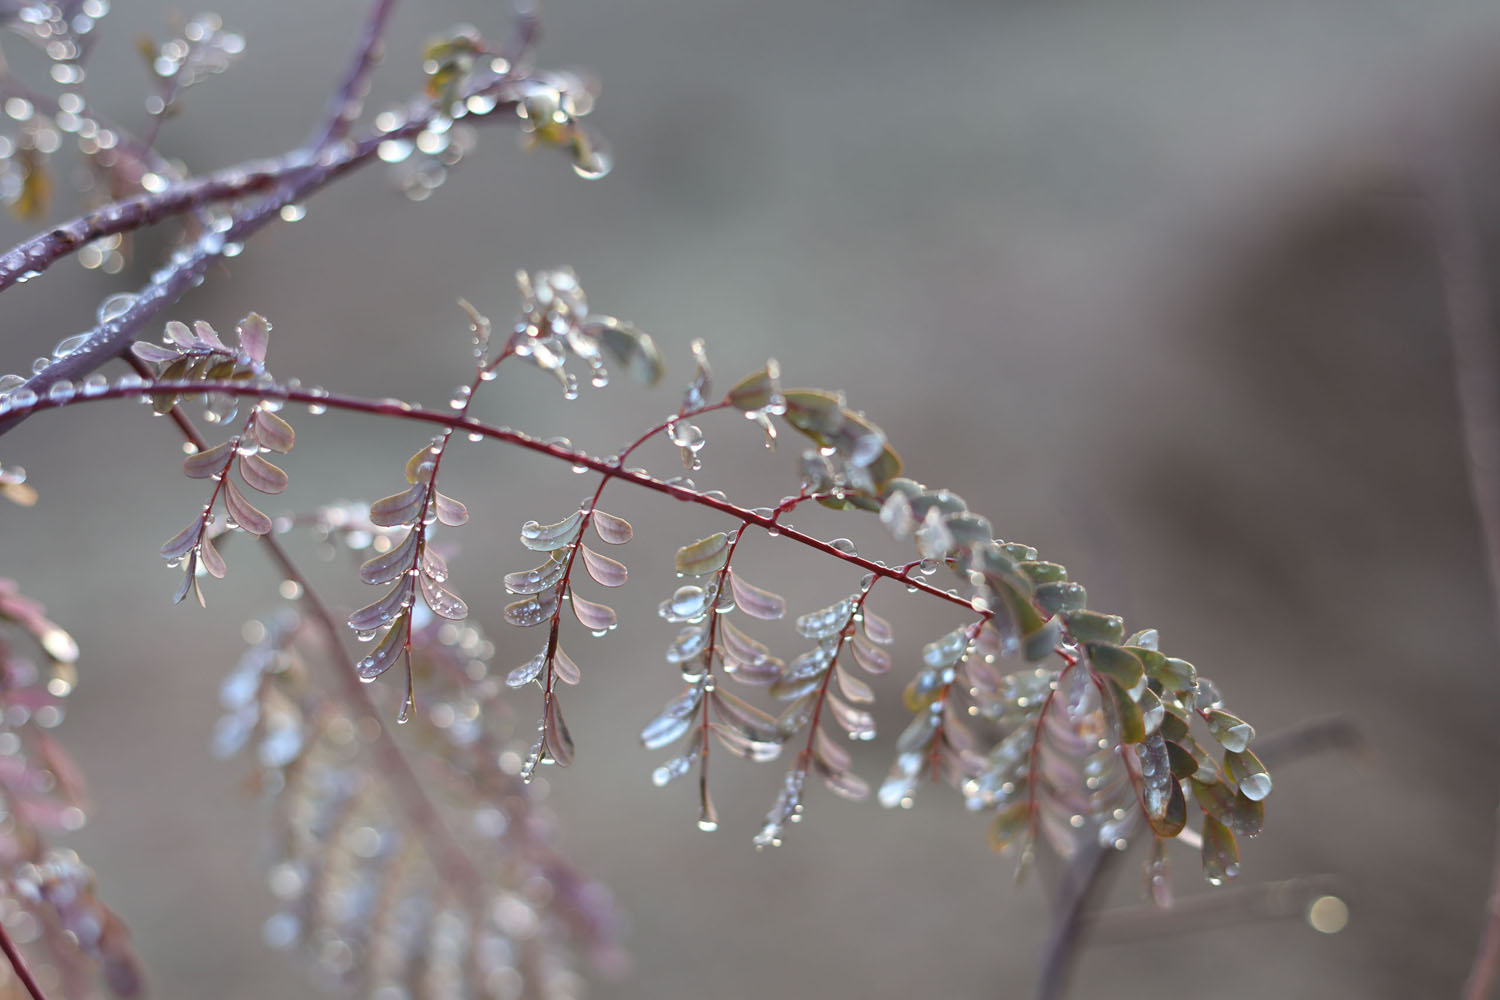 Dew on some leaves